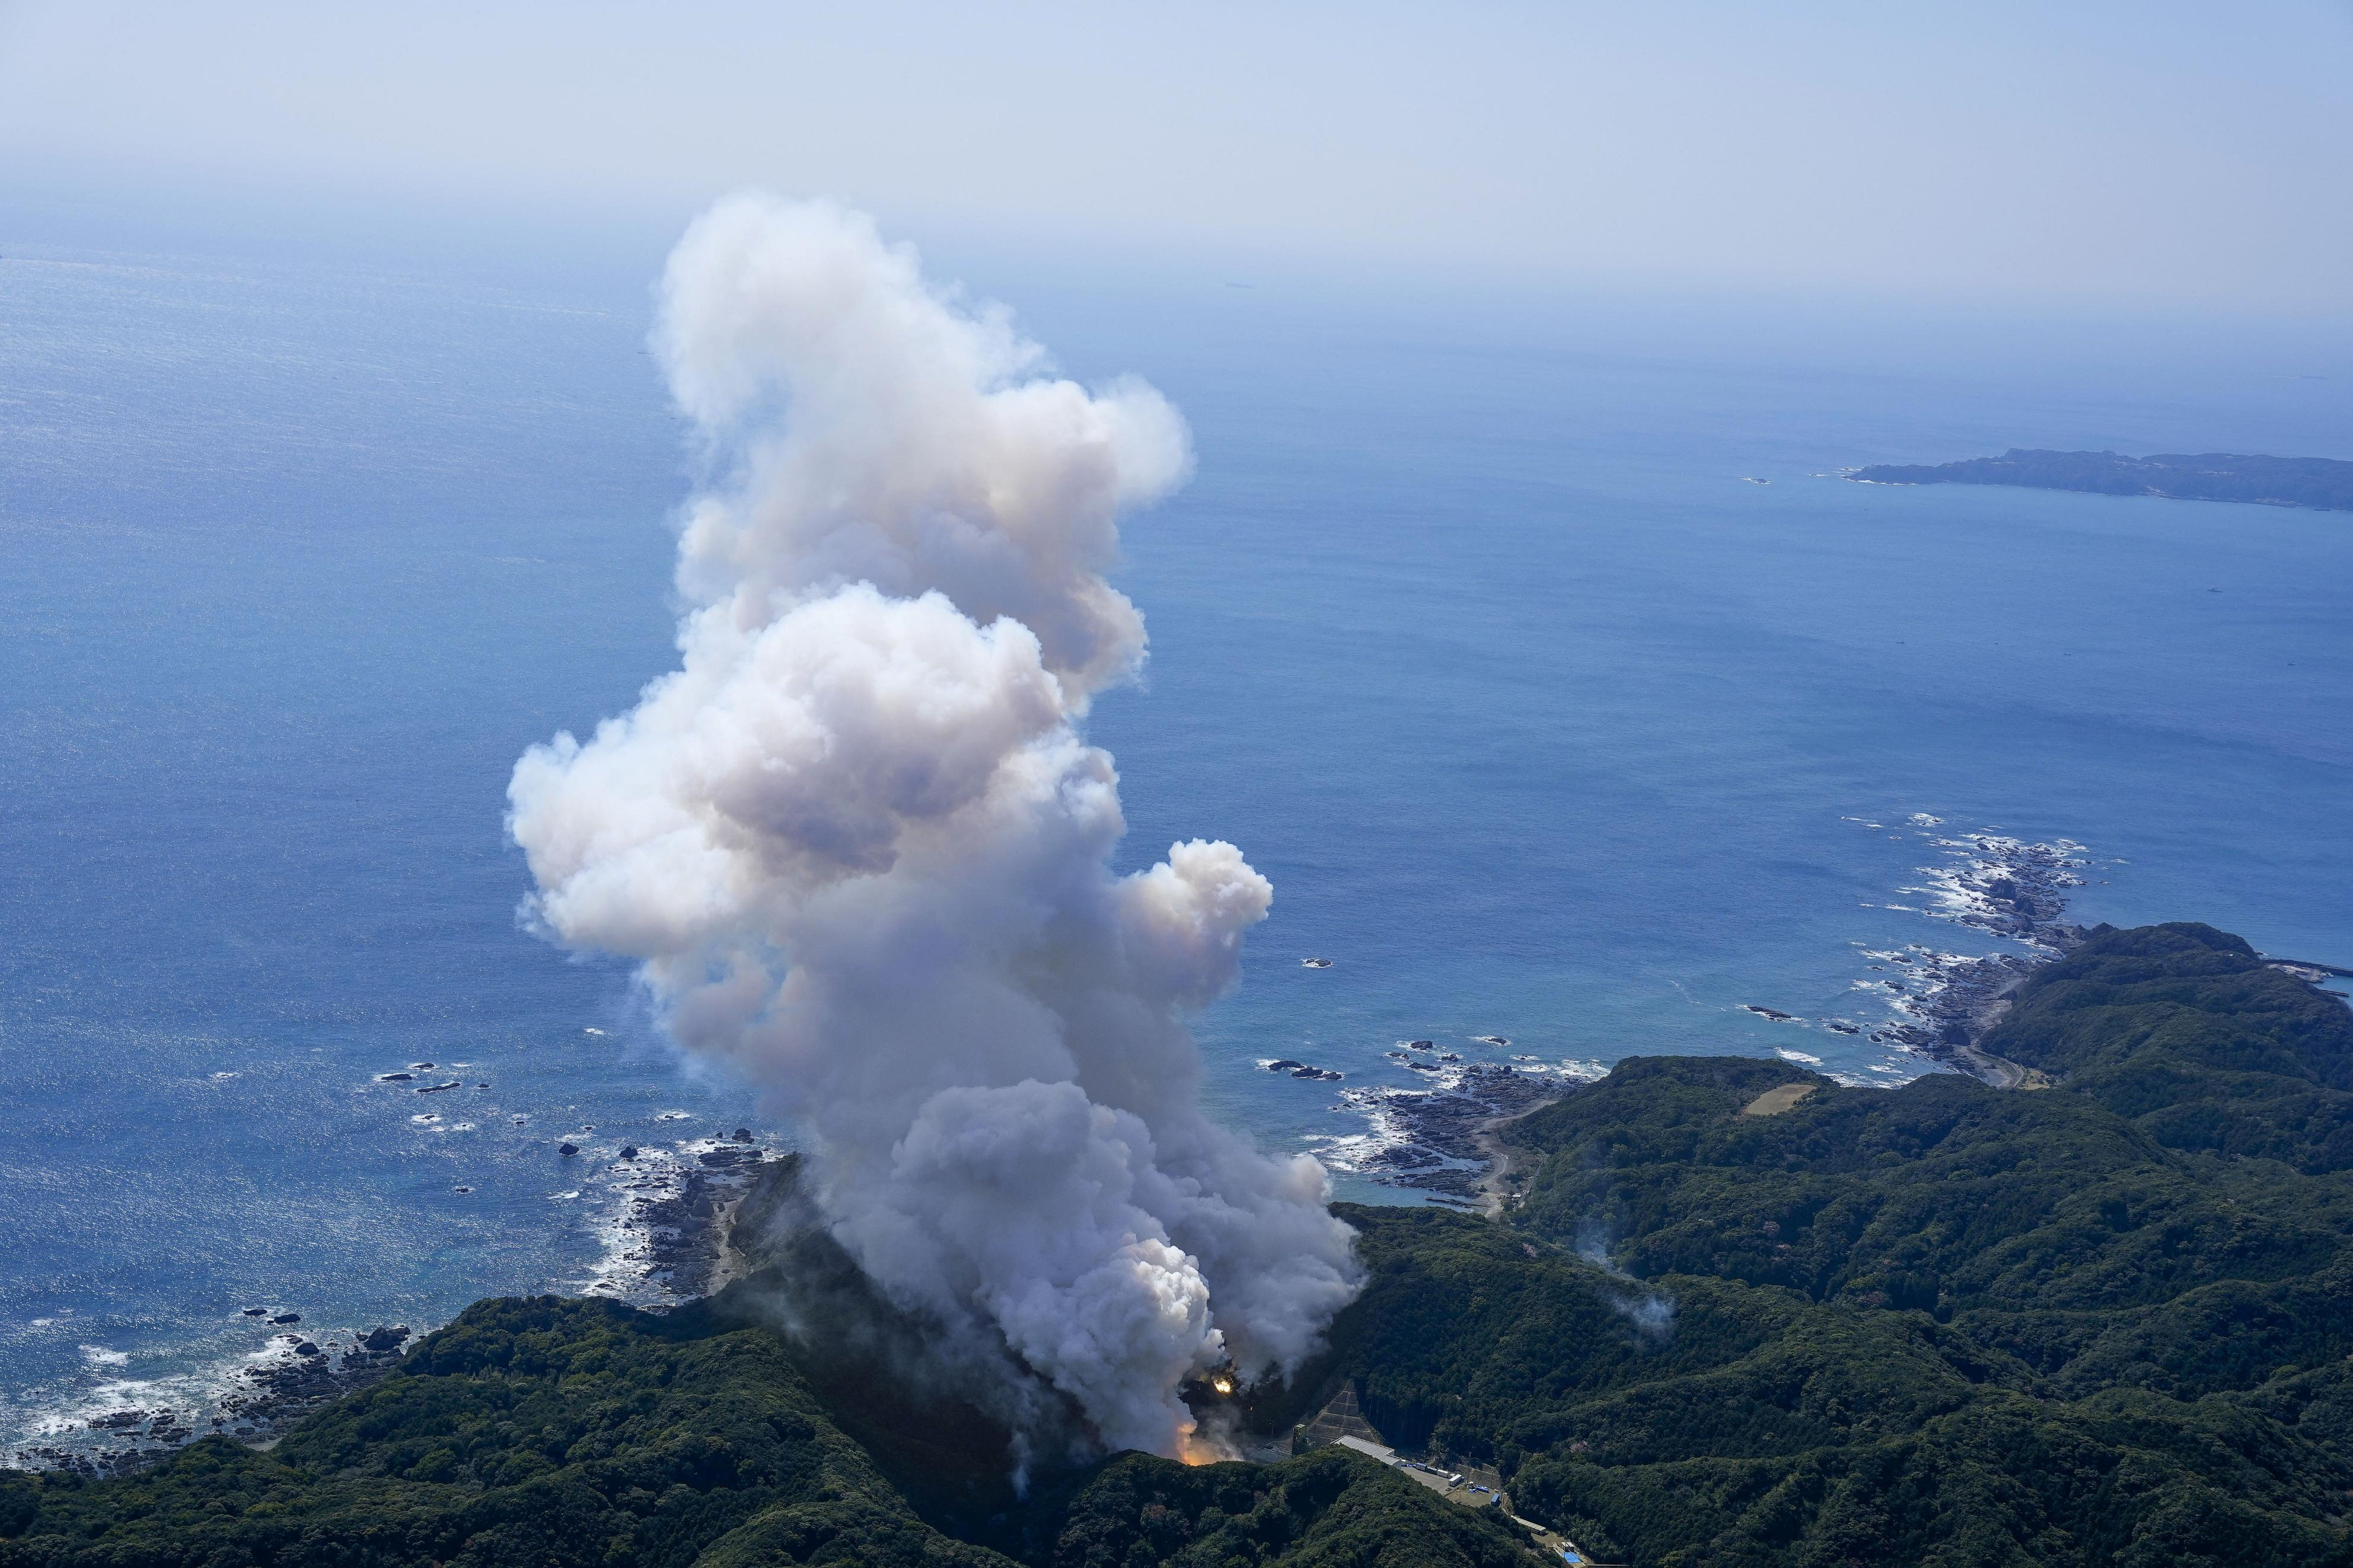 Japan's Space One's small, solid-fueled Kairos rocket exploded shortly after its inaugural launch in Kushimoto town, Wakayama prefecture